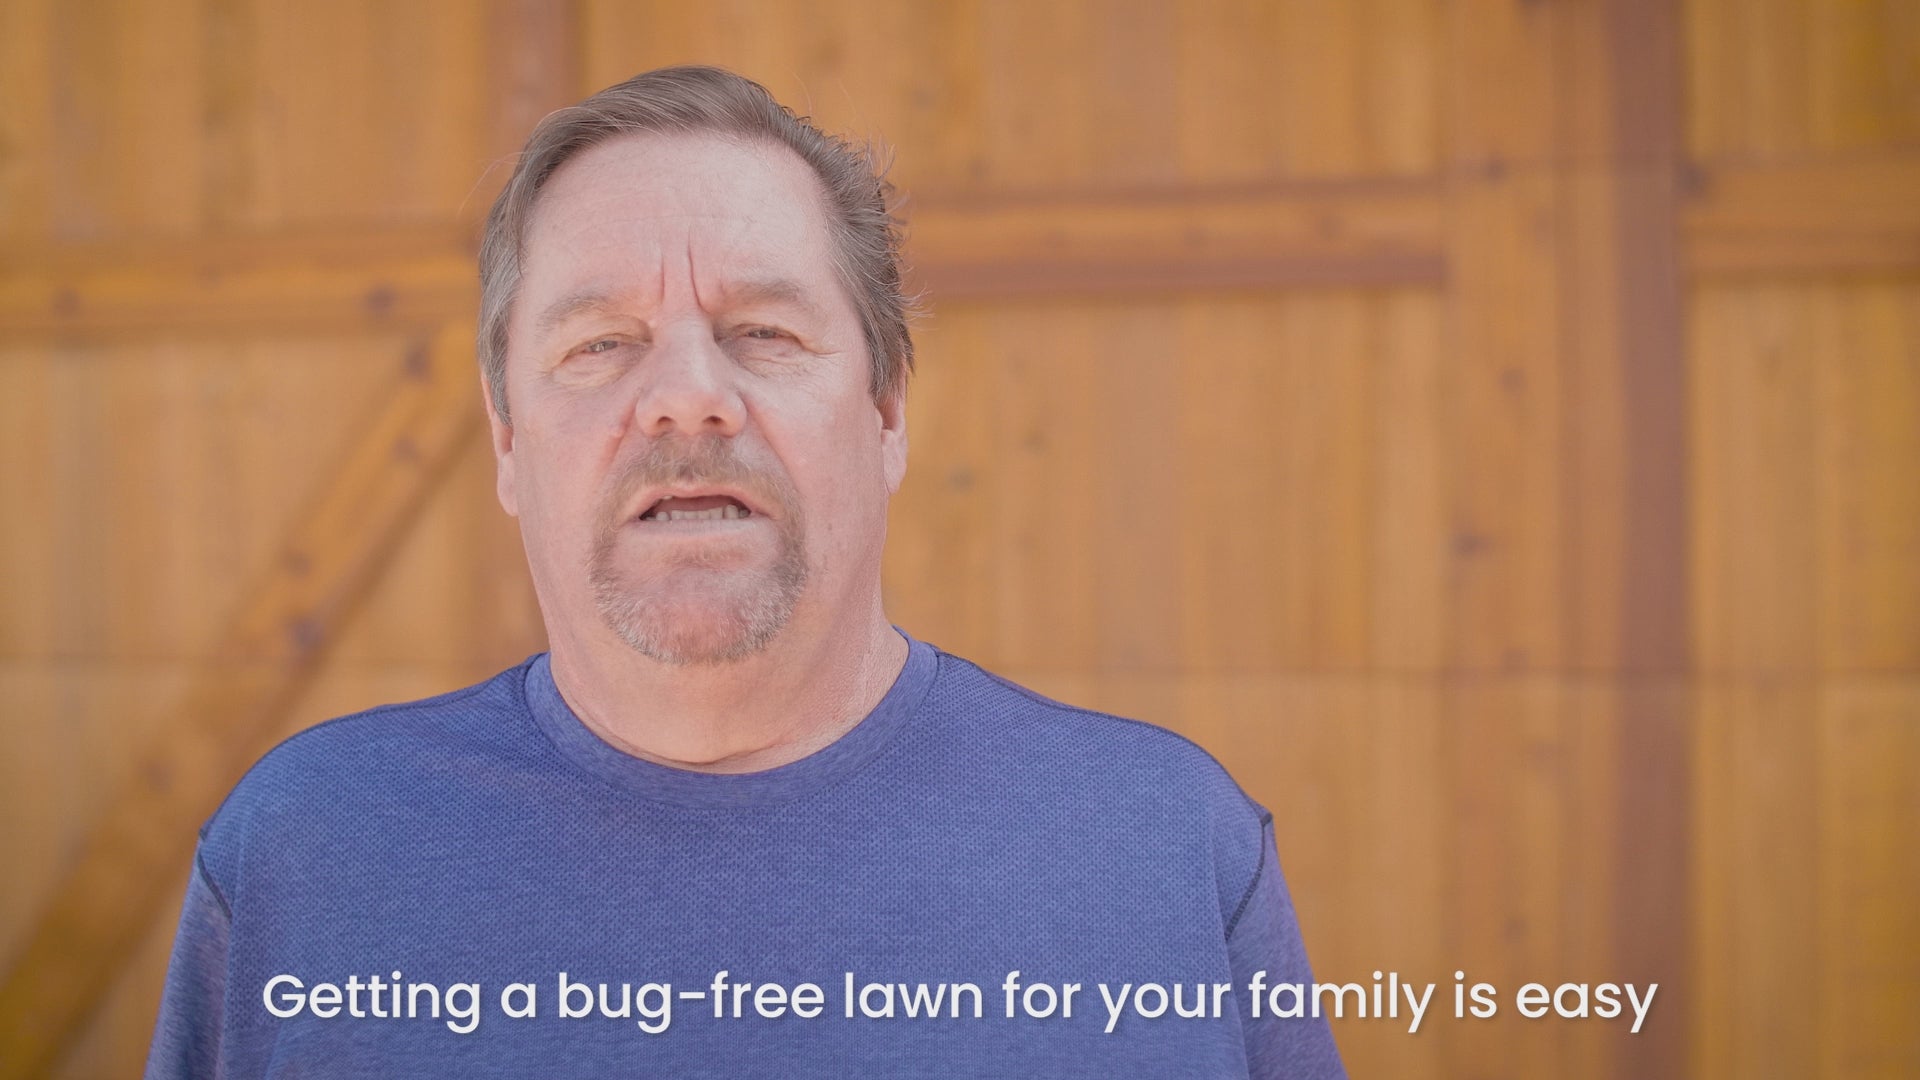 Load video: Get a Bug-Free Lawn without Toxic Chemicals